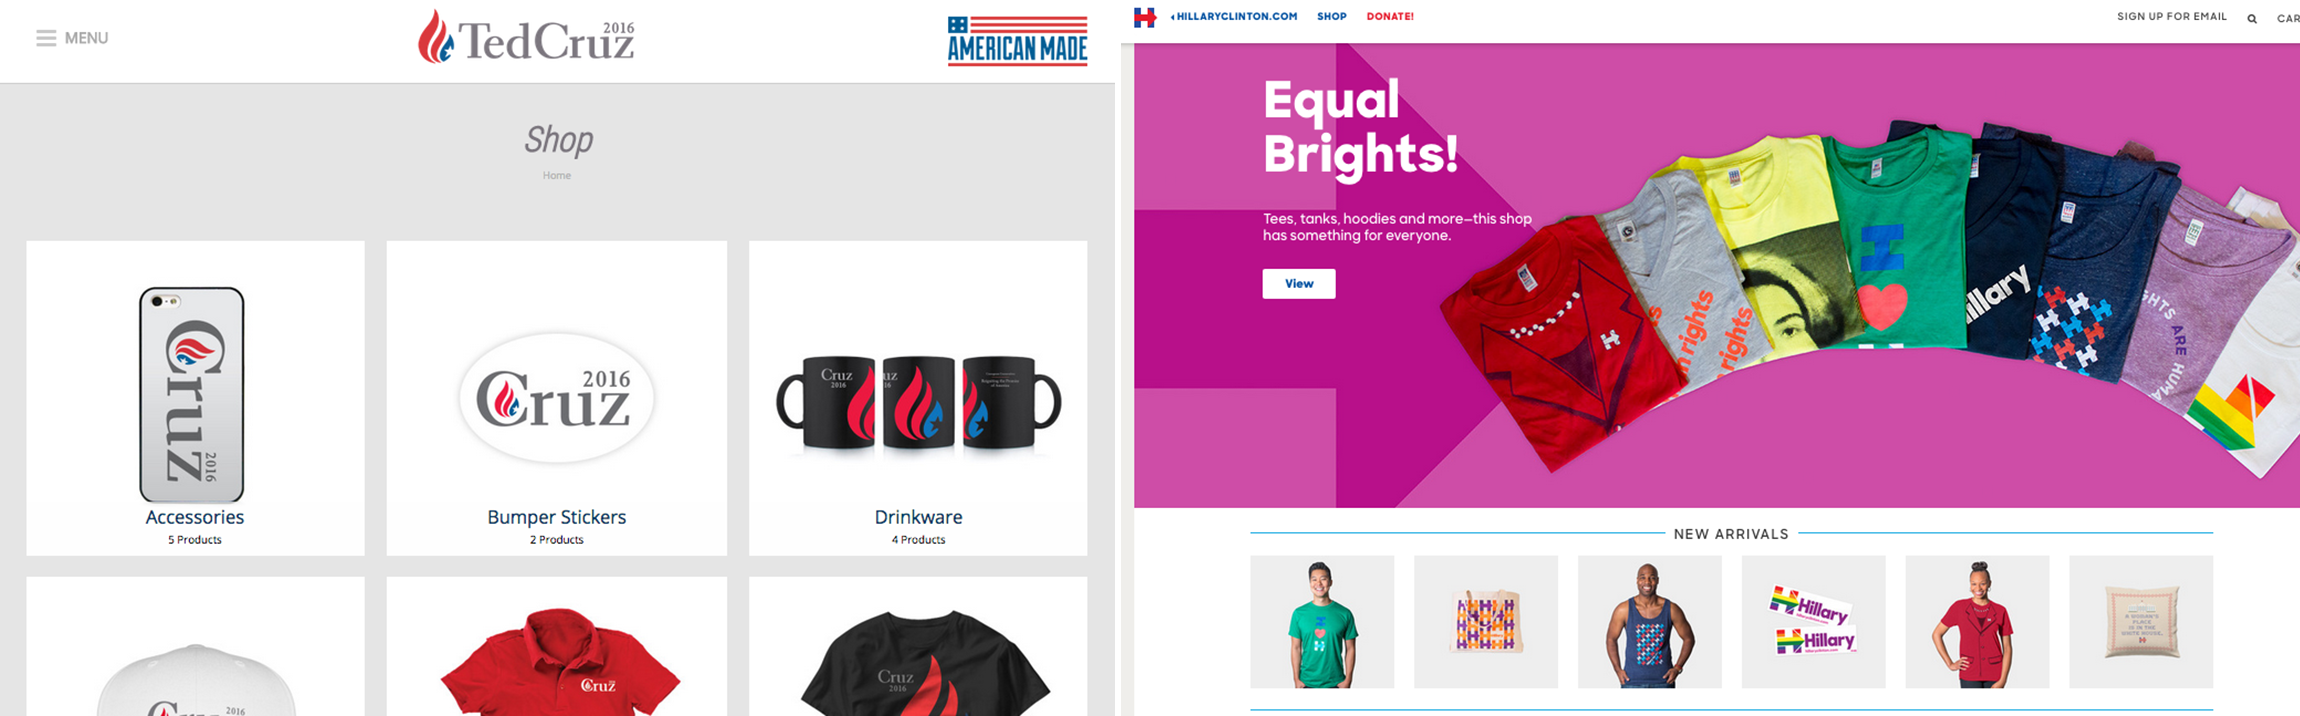 Ted Cruz's online campaign store on left, Hillary Clinton on right.